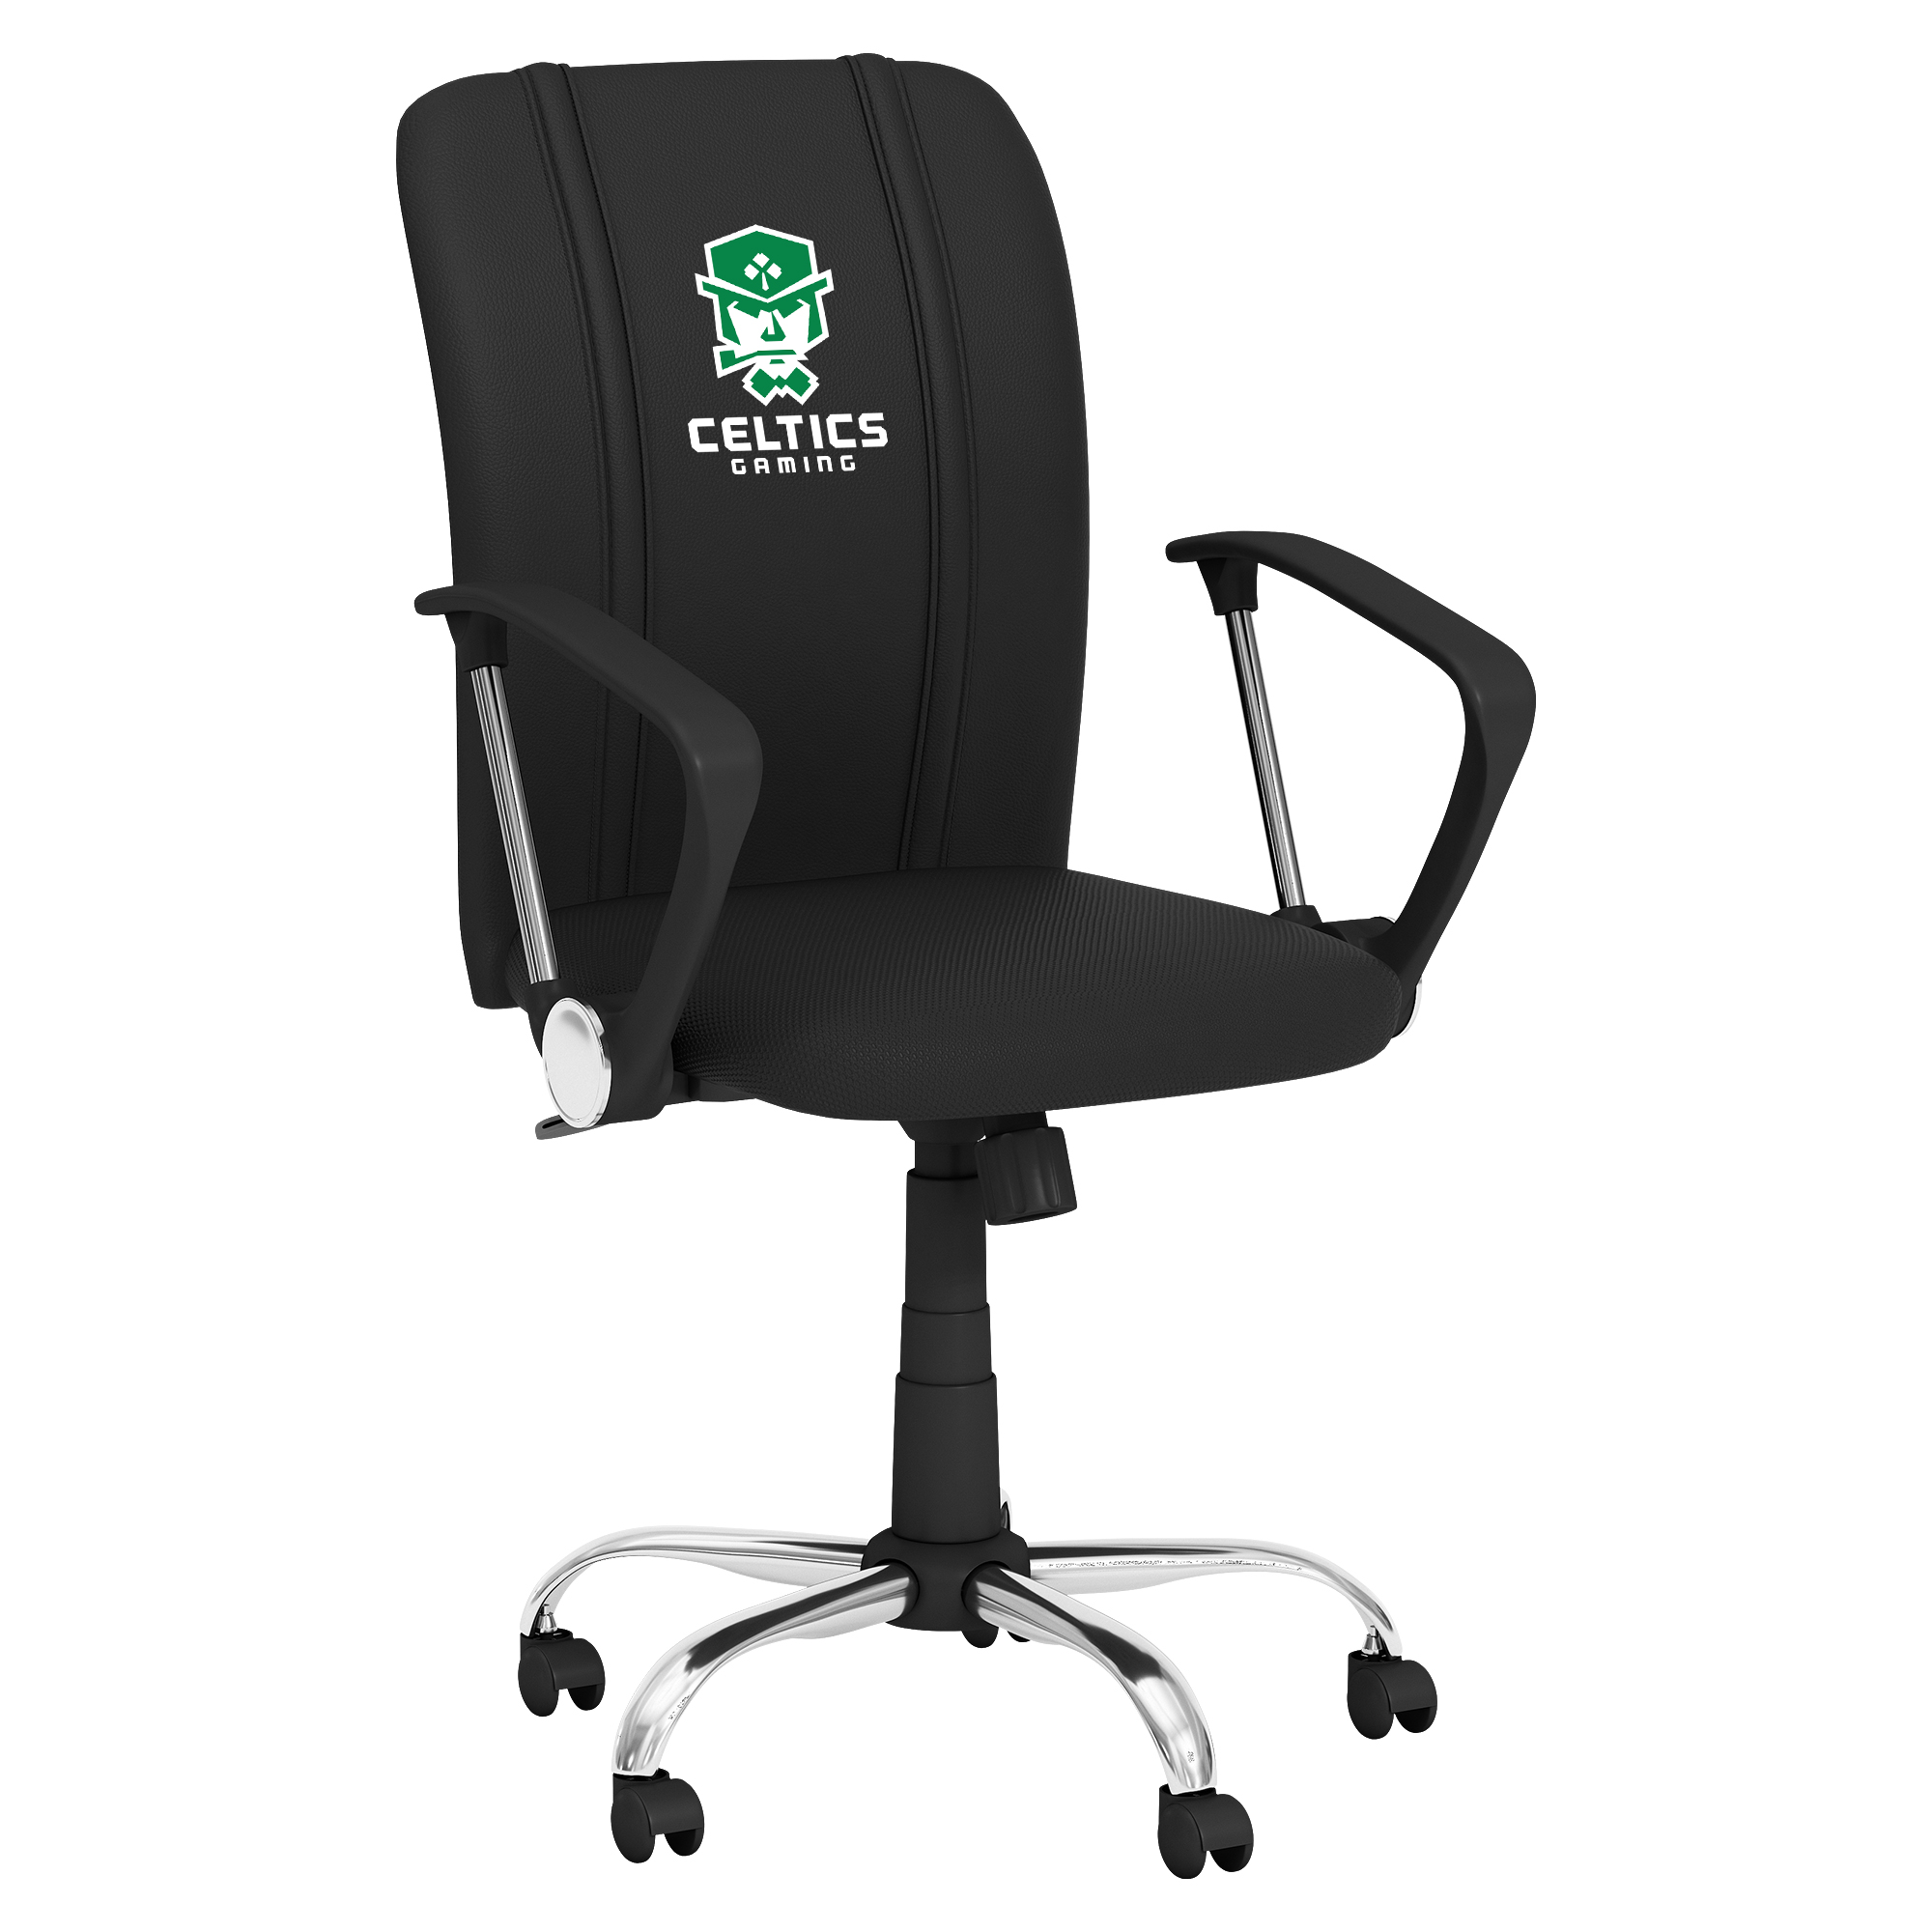 Boston Celtics Curve Task Chair with Celtics Crossover Gaming Primary